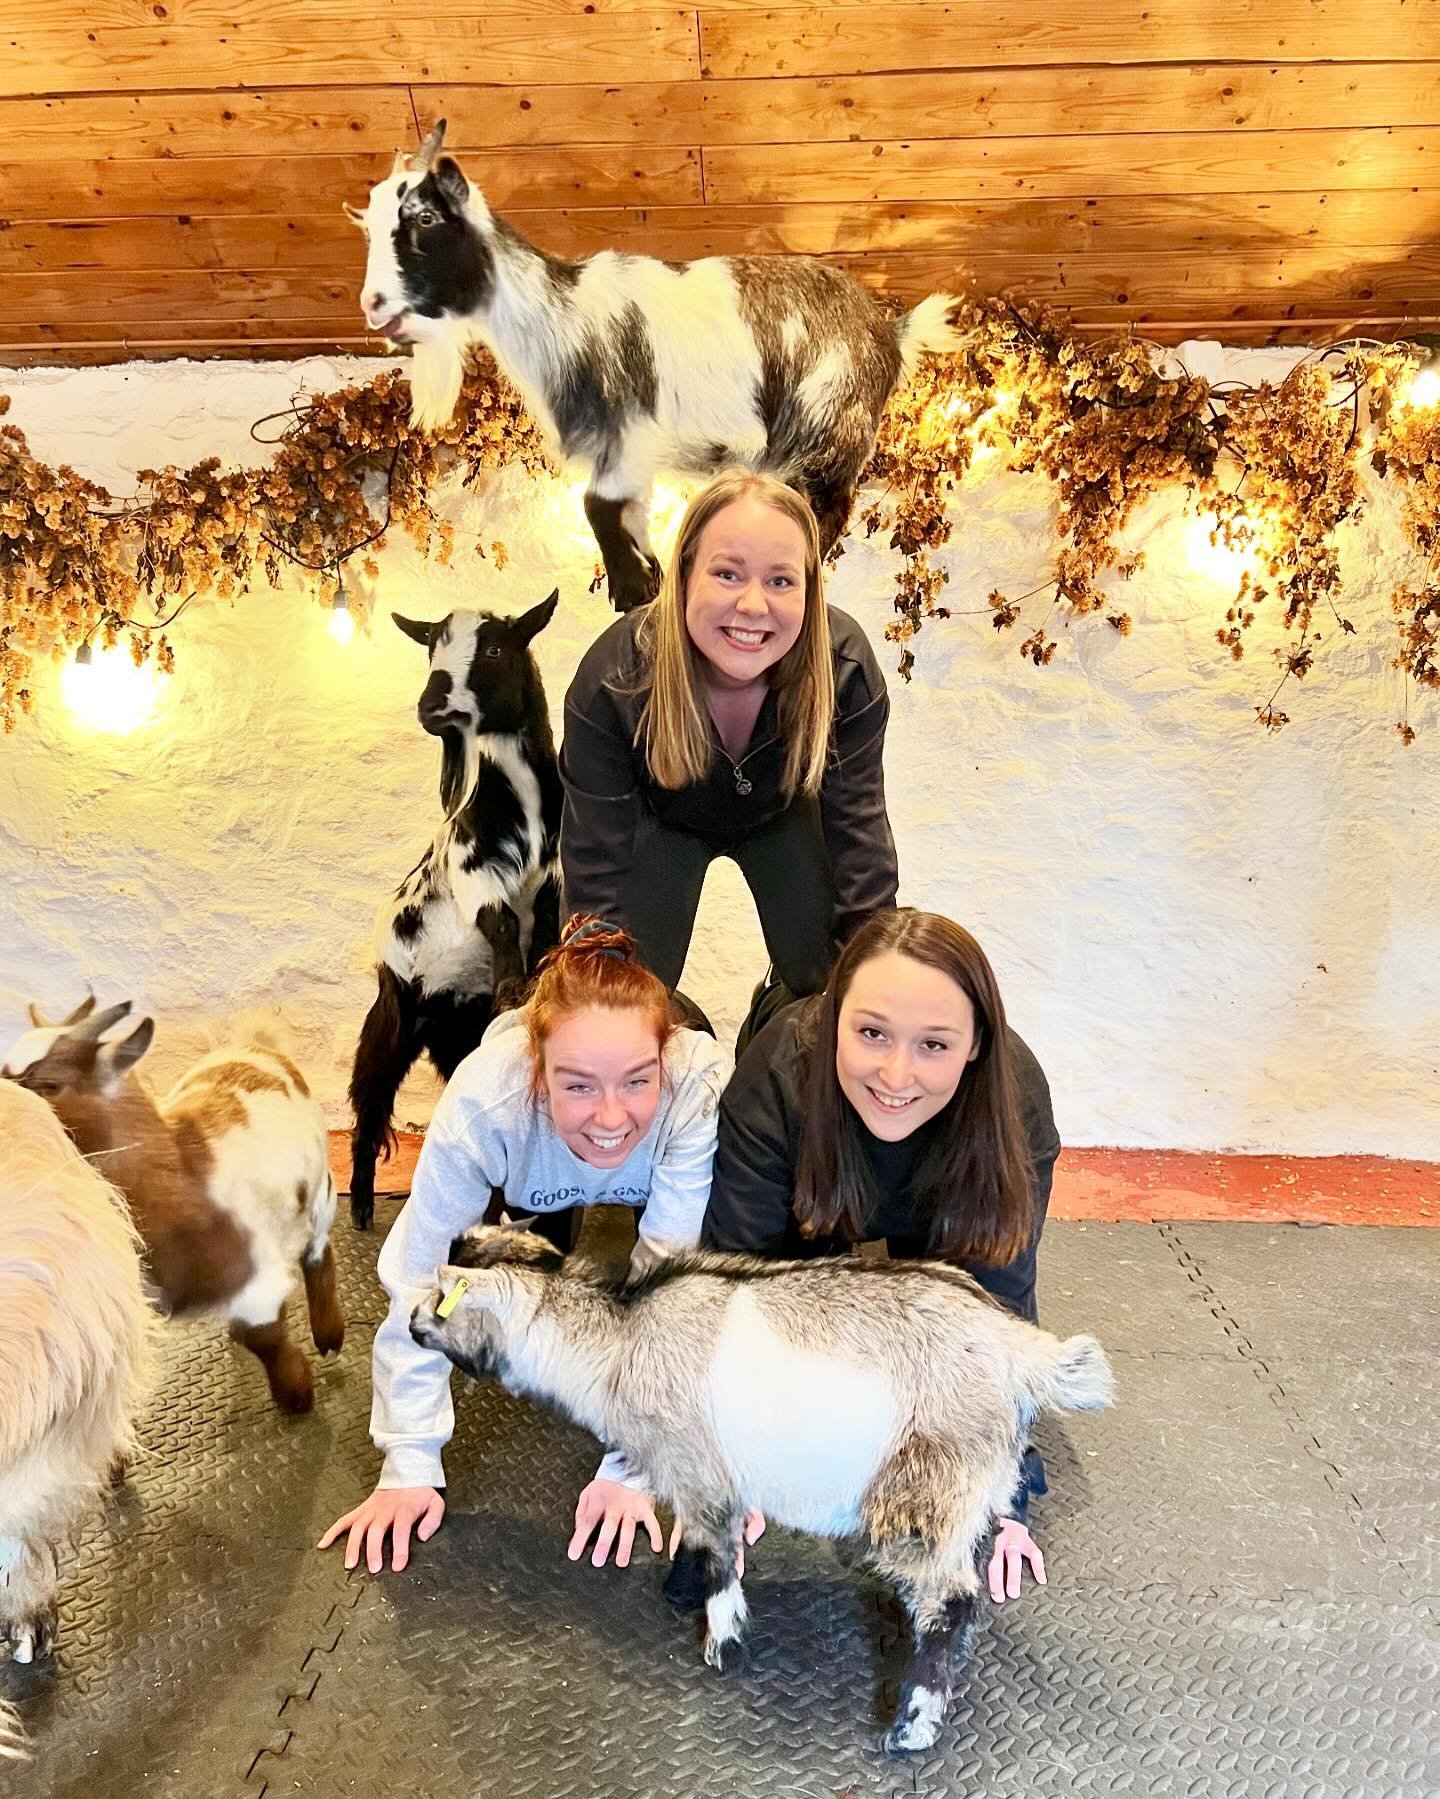 15 tickets sold within 30 minutes of release, get yours now and don&rsquo;t miss out! @thepilatesattic 

#goats #pygmygoats #goatsofinstagram #goatpilates #goatyoga #edinburgh #fife #scotland #babygoats